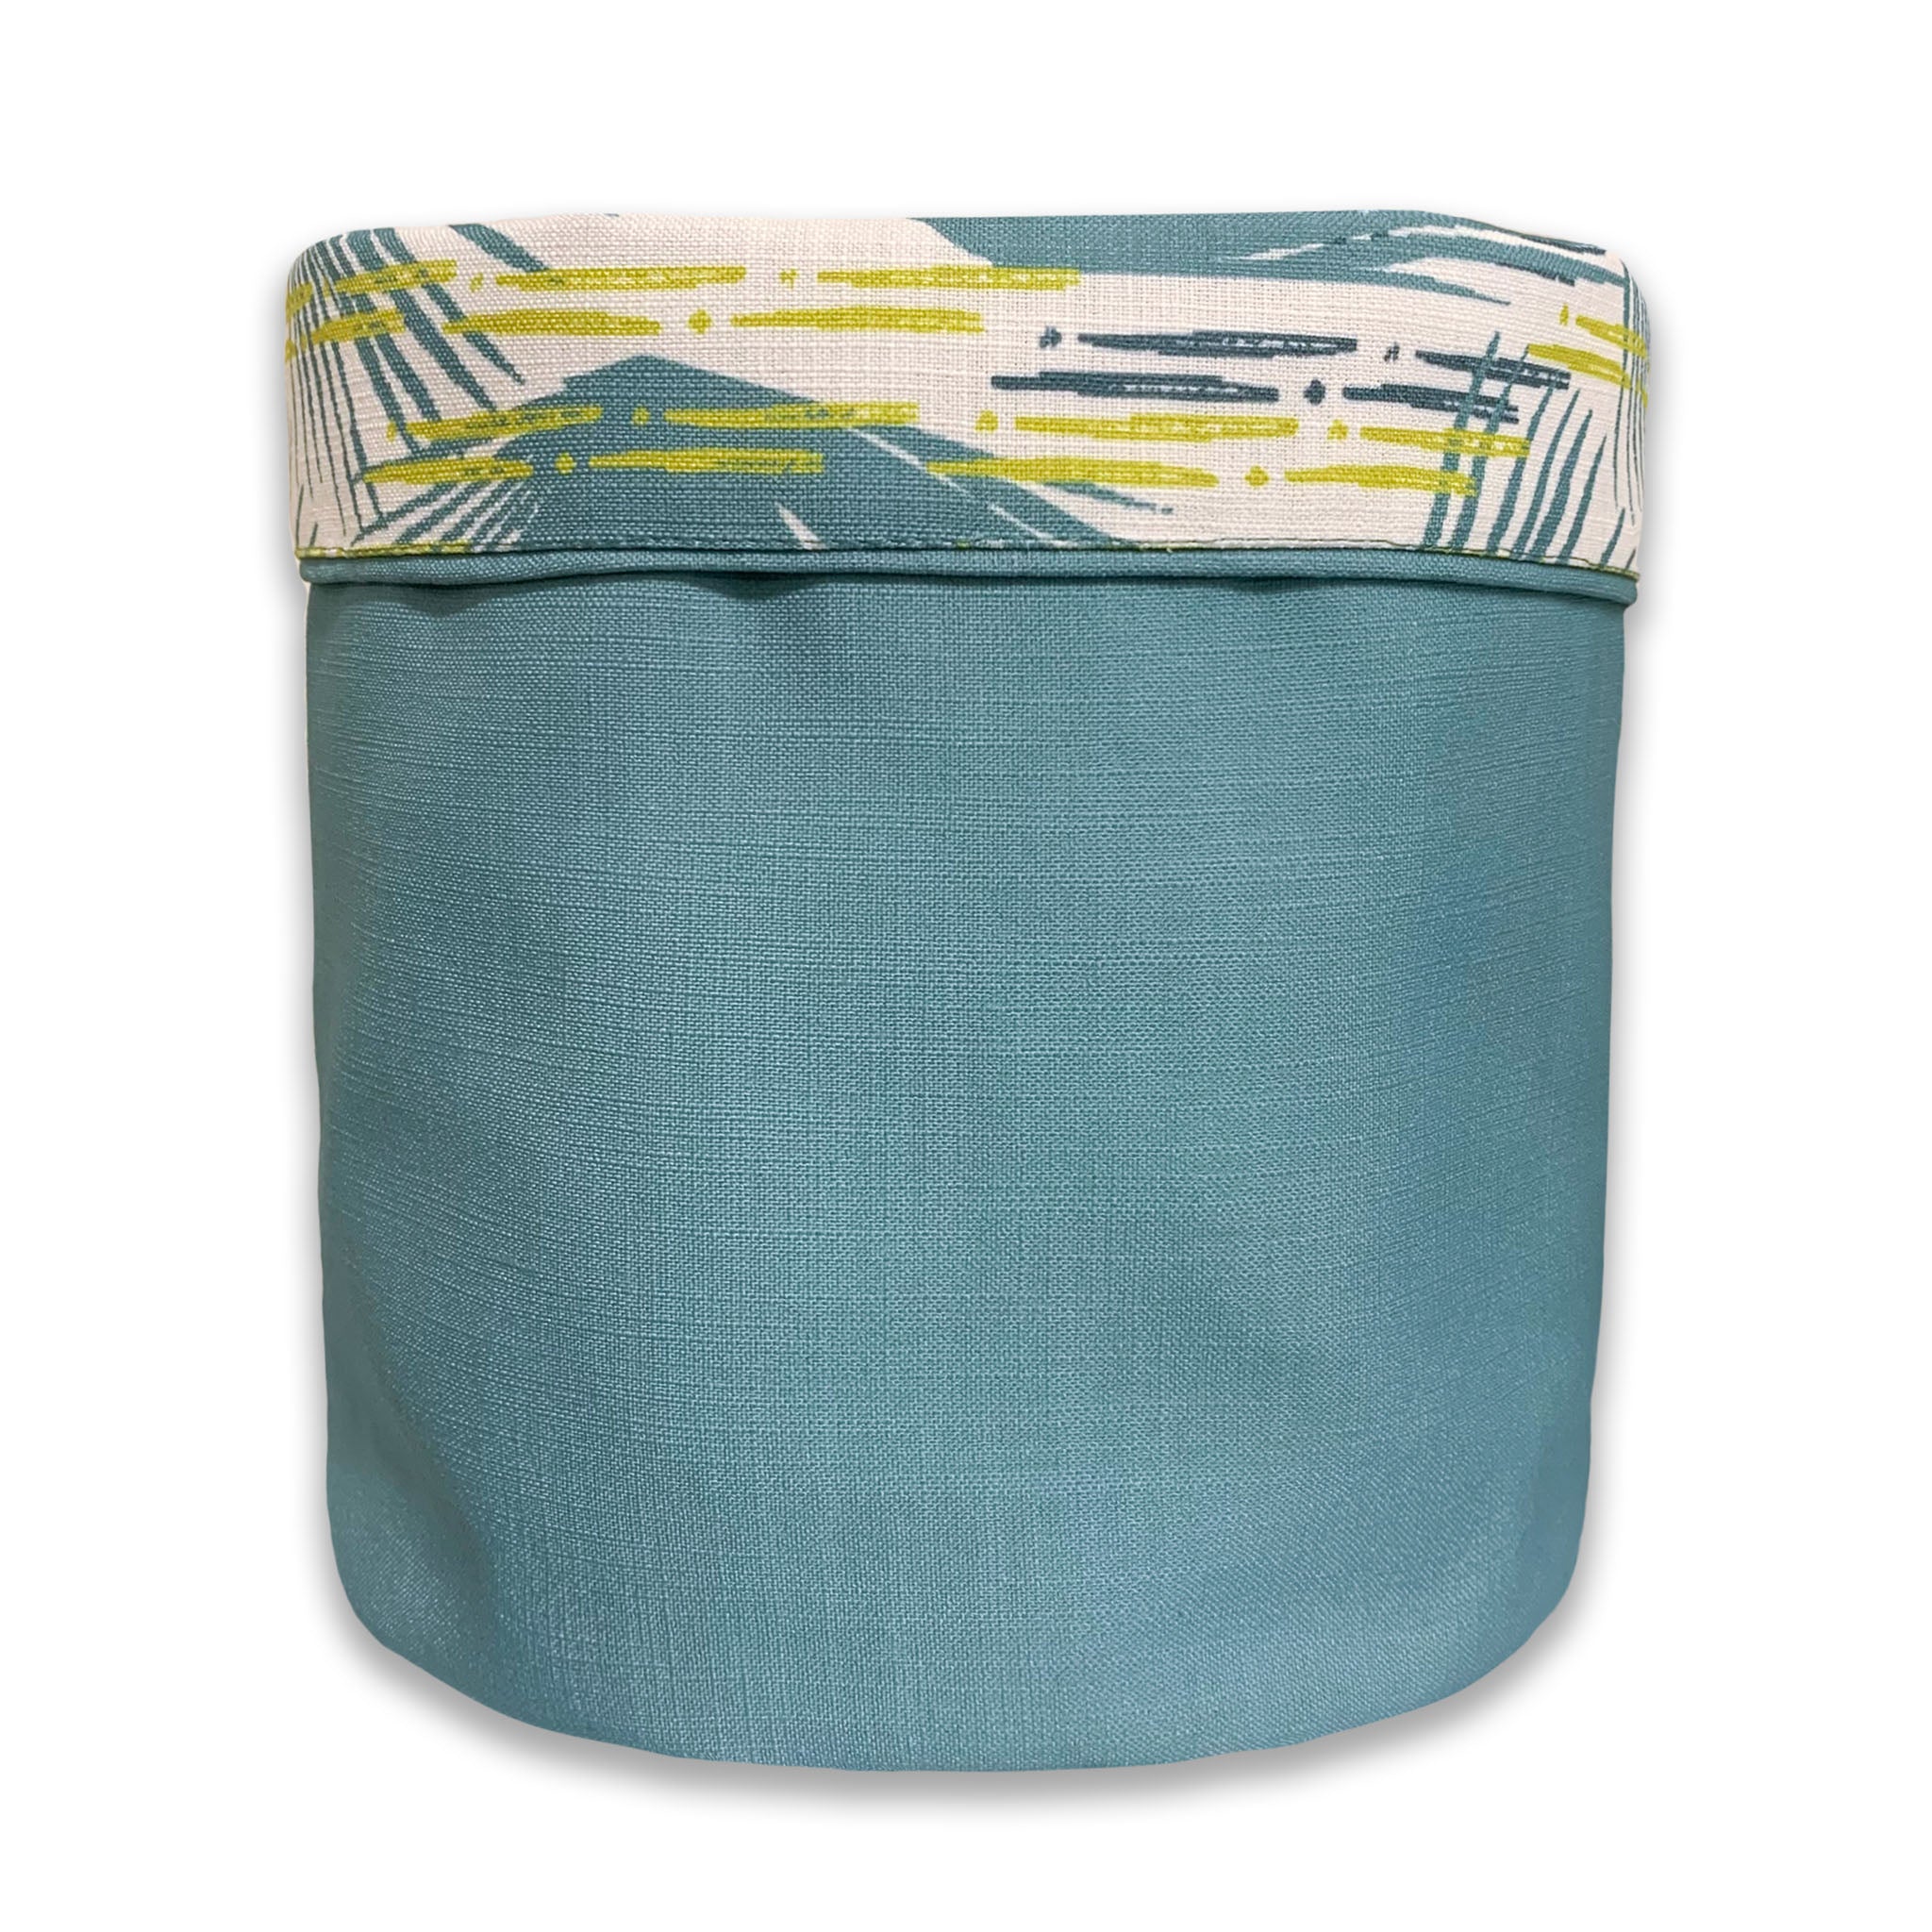 Ivory and Teal Loulu Fabric Planter - Large